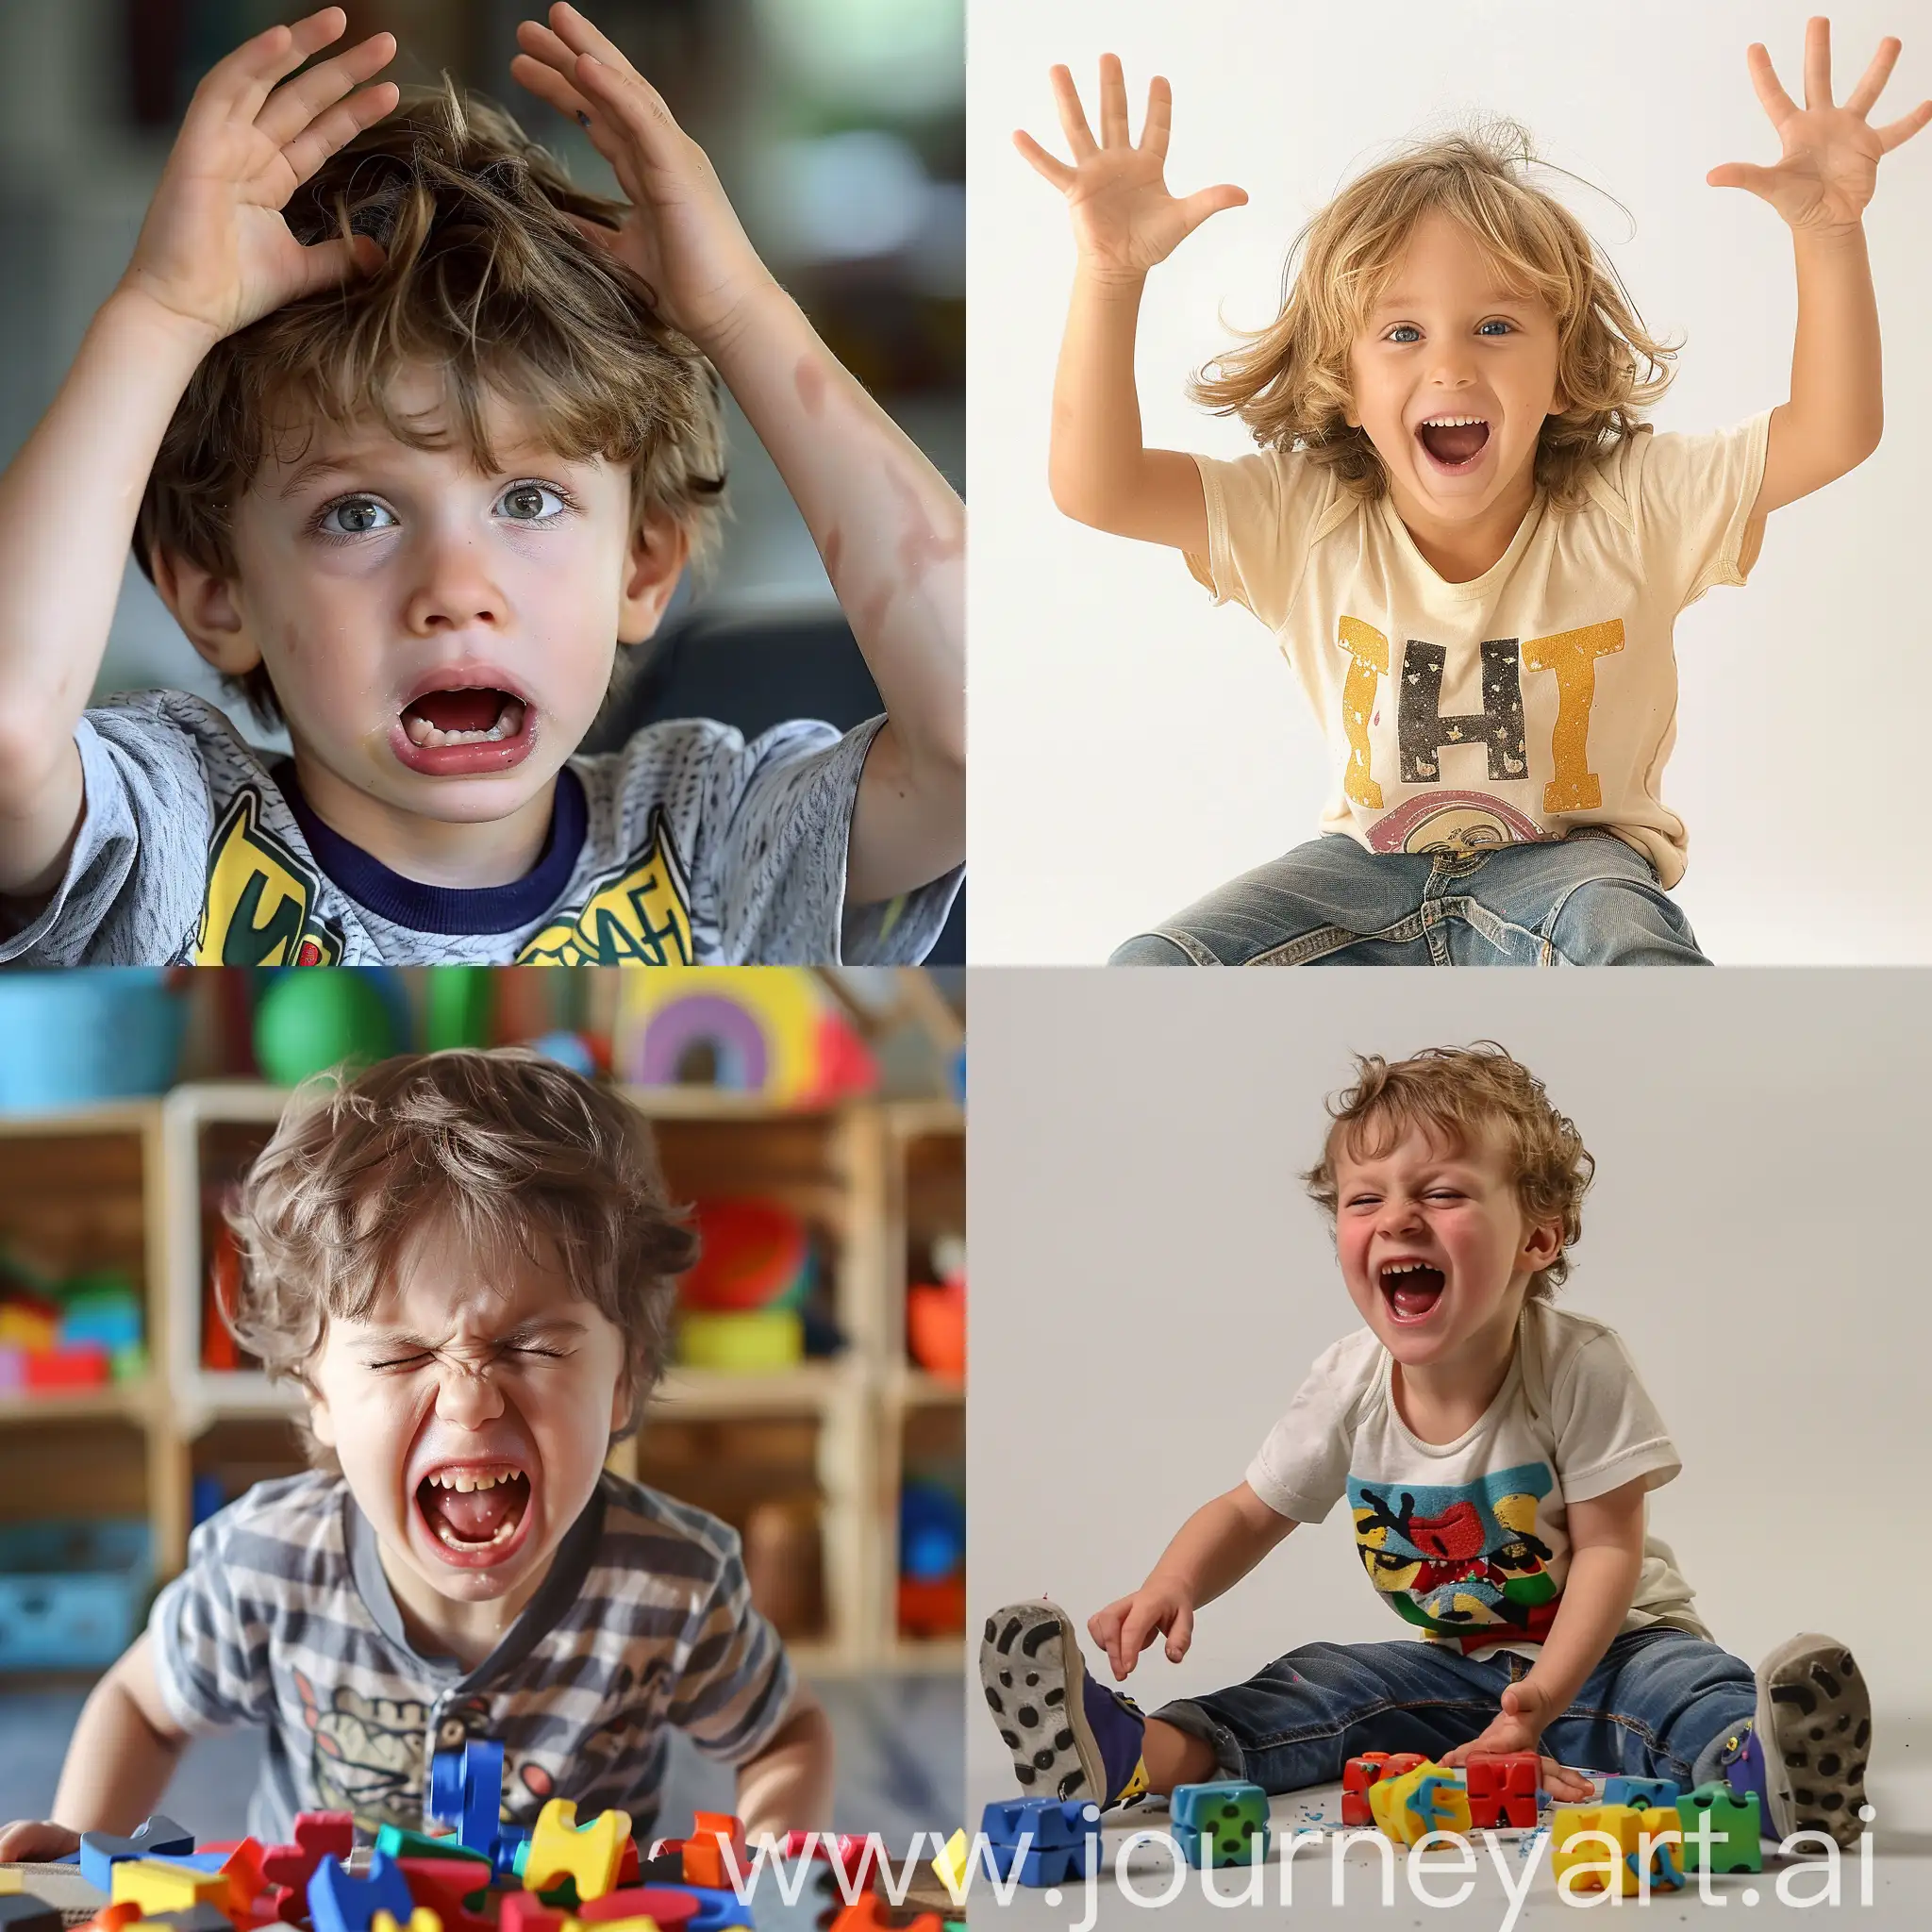 Energetic-Child-with-ADHD-Playing-in-24-Dynamic-Images